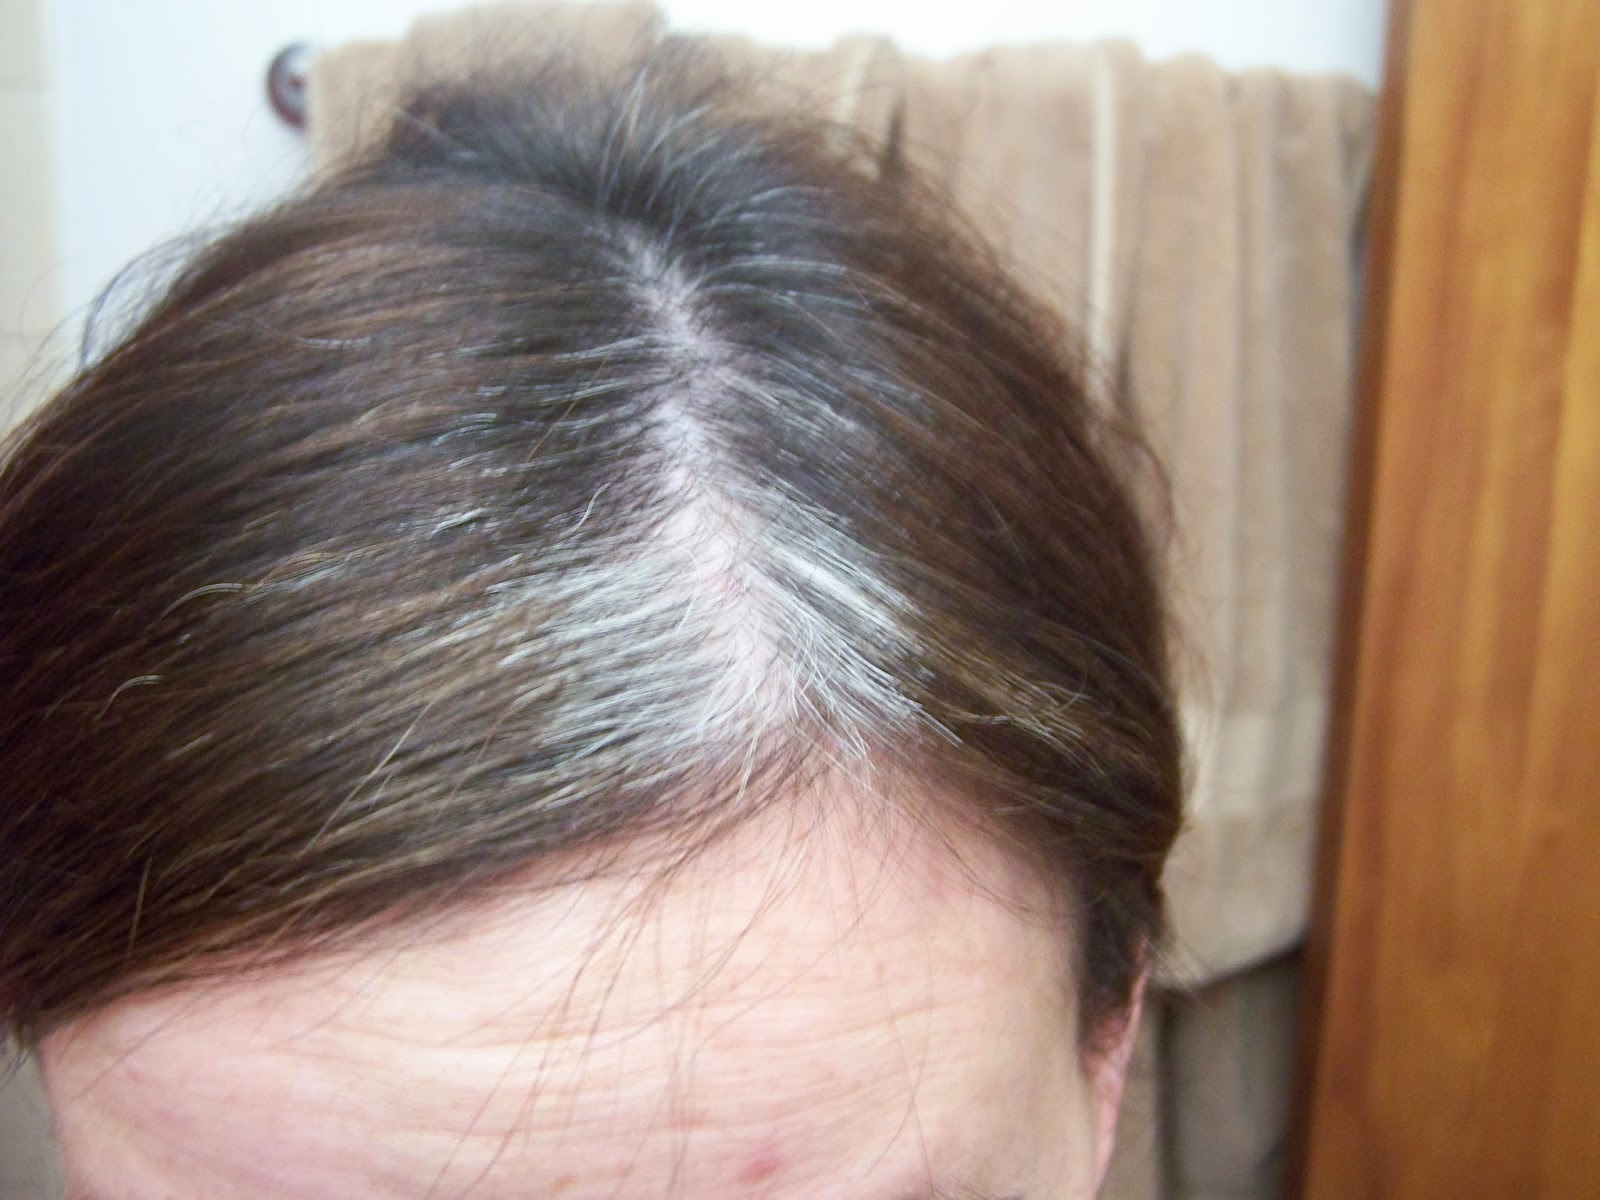 HOW TO RID OF GREY HAIRS Http Divawantsblogspotcouk